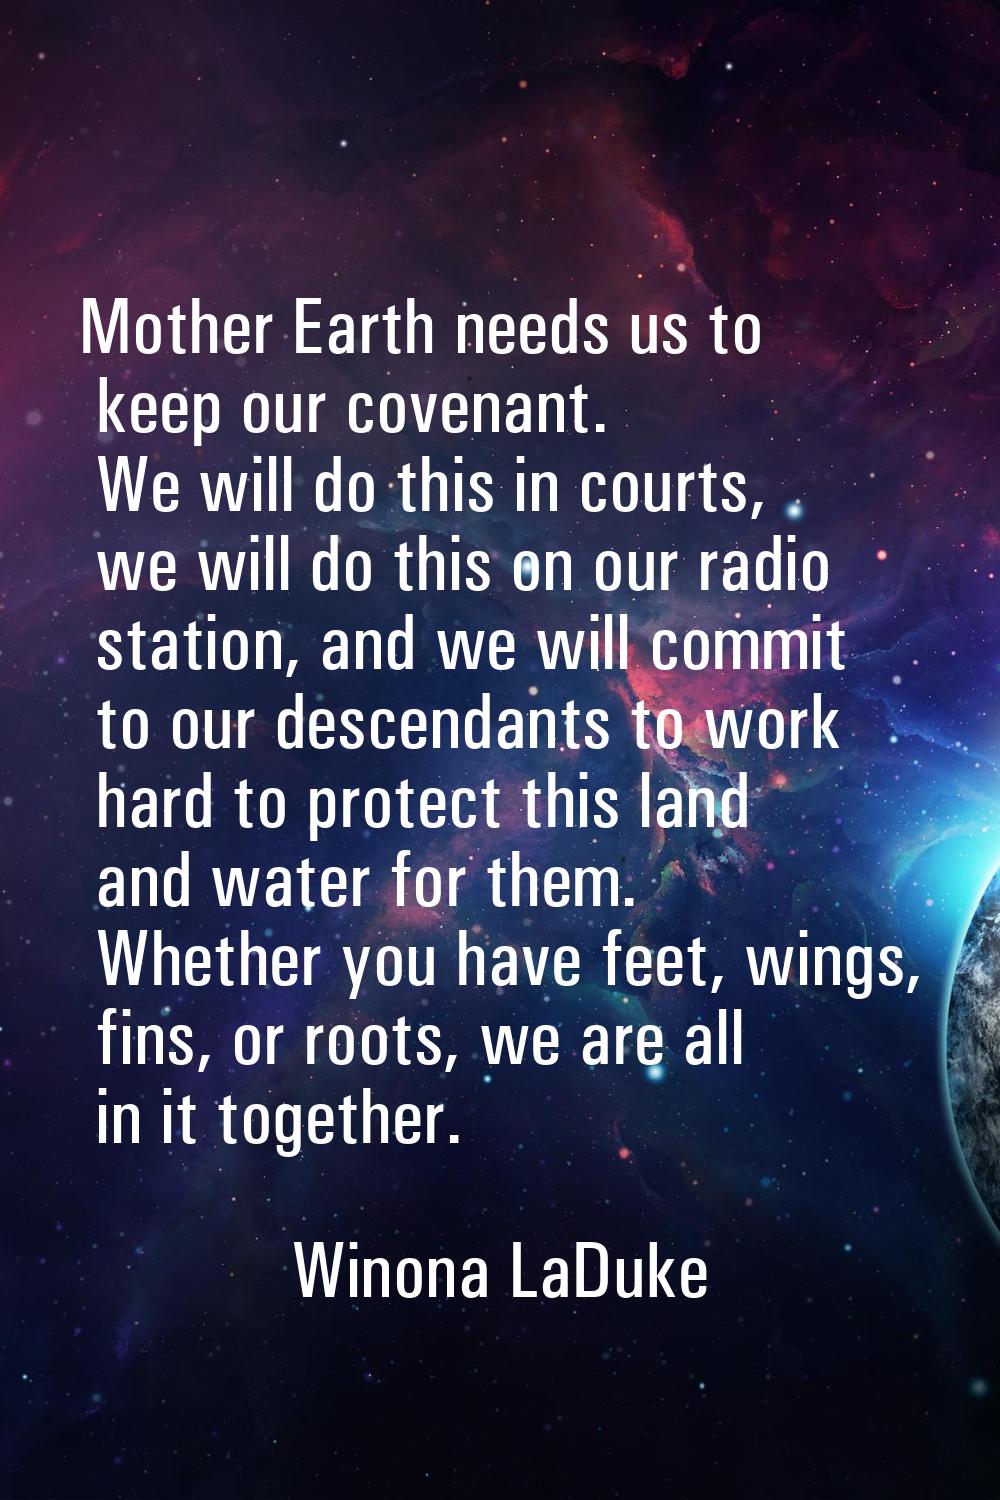 Mother Earth needs us to keep our covenant. We will do this in courts, we will do this on our radio